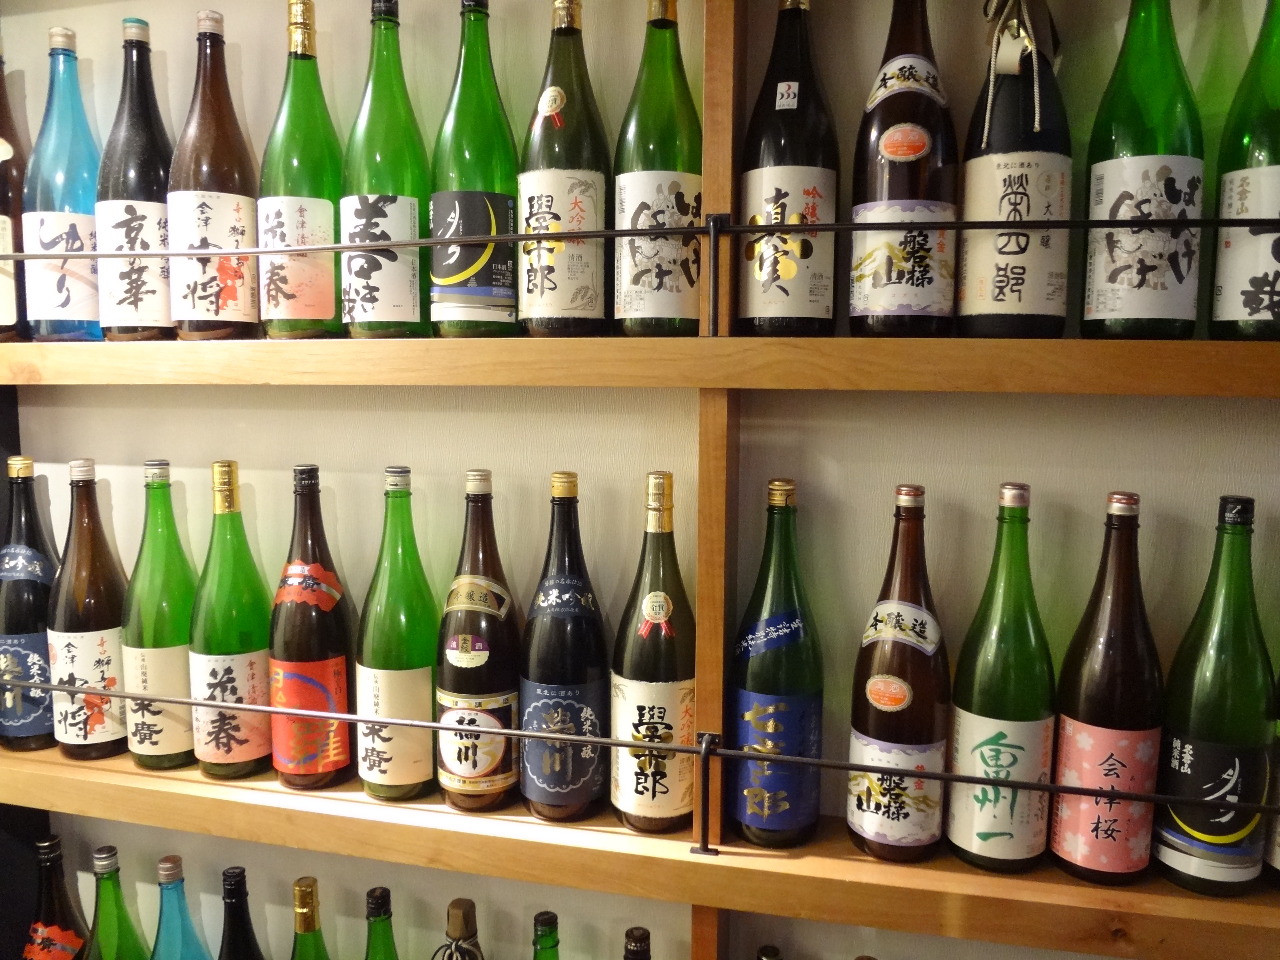 SAKE - An alcoholic beverage of Japanese origin made from fermented rice